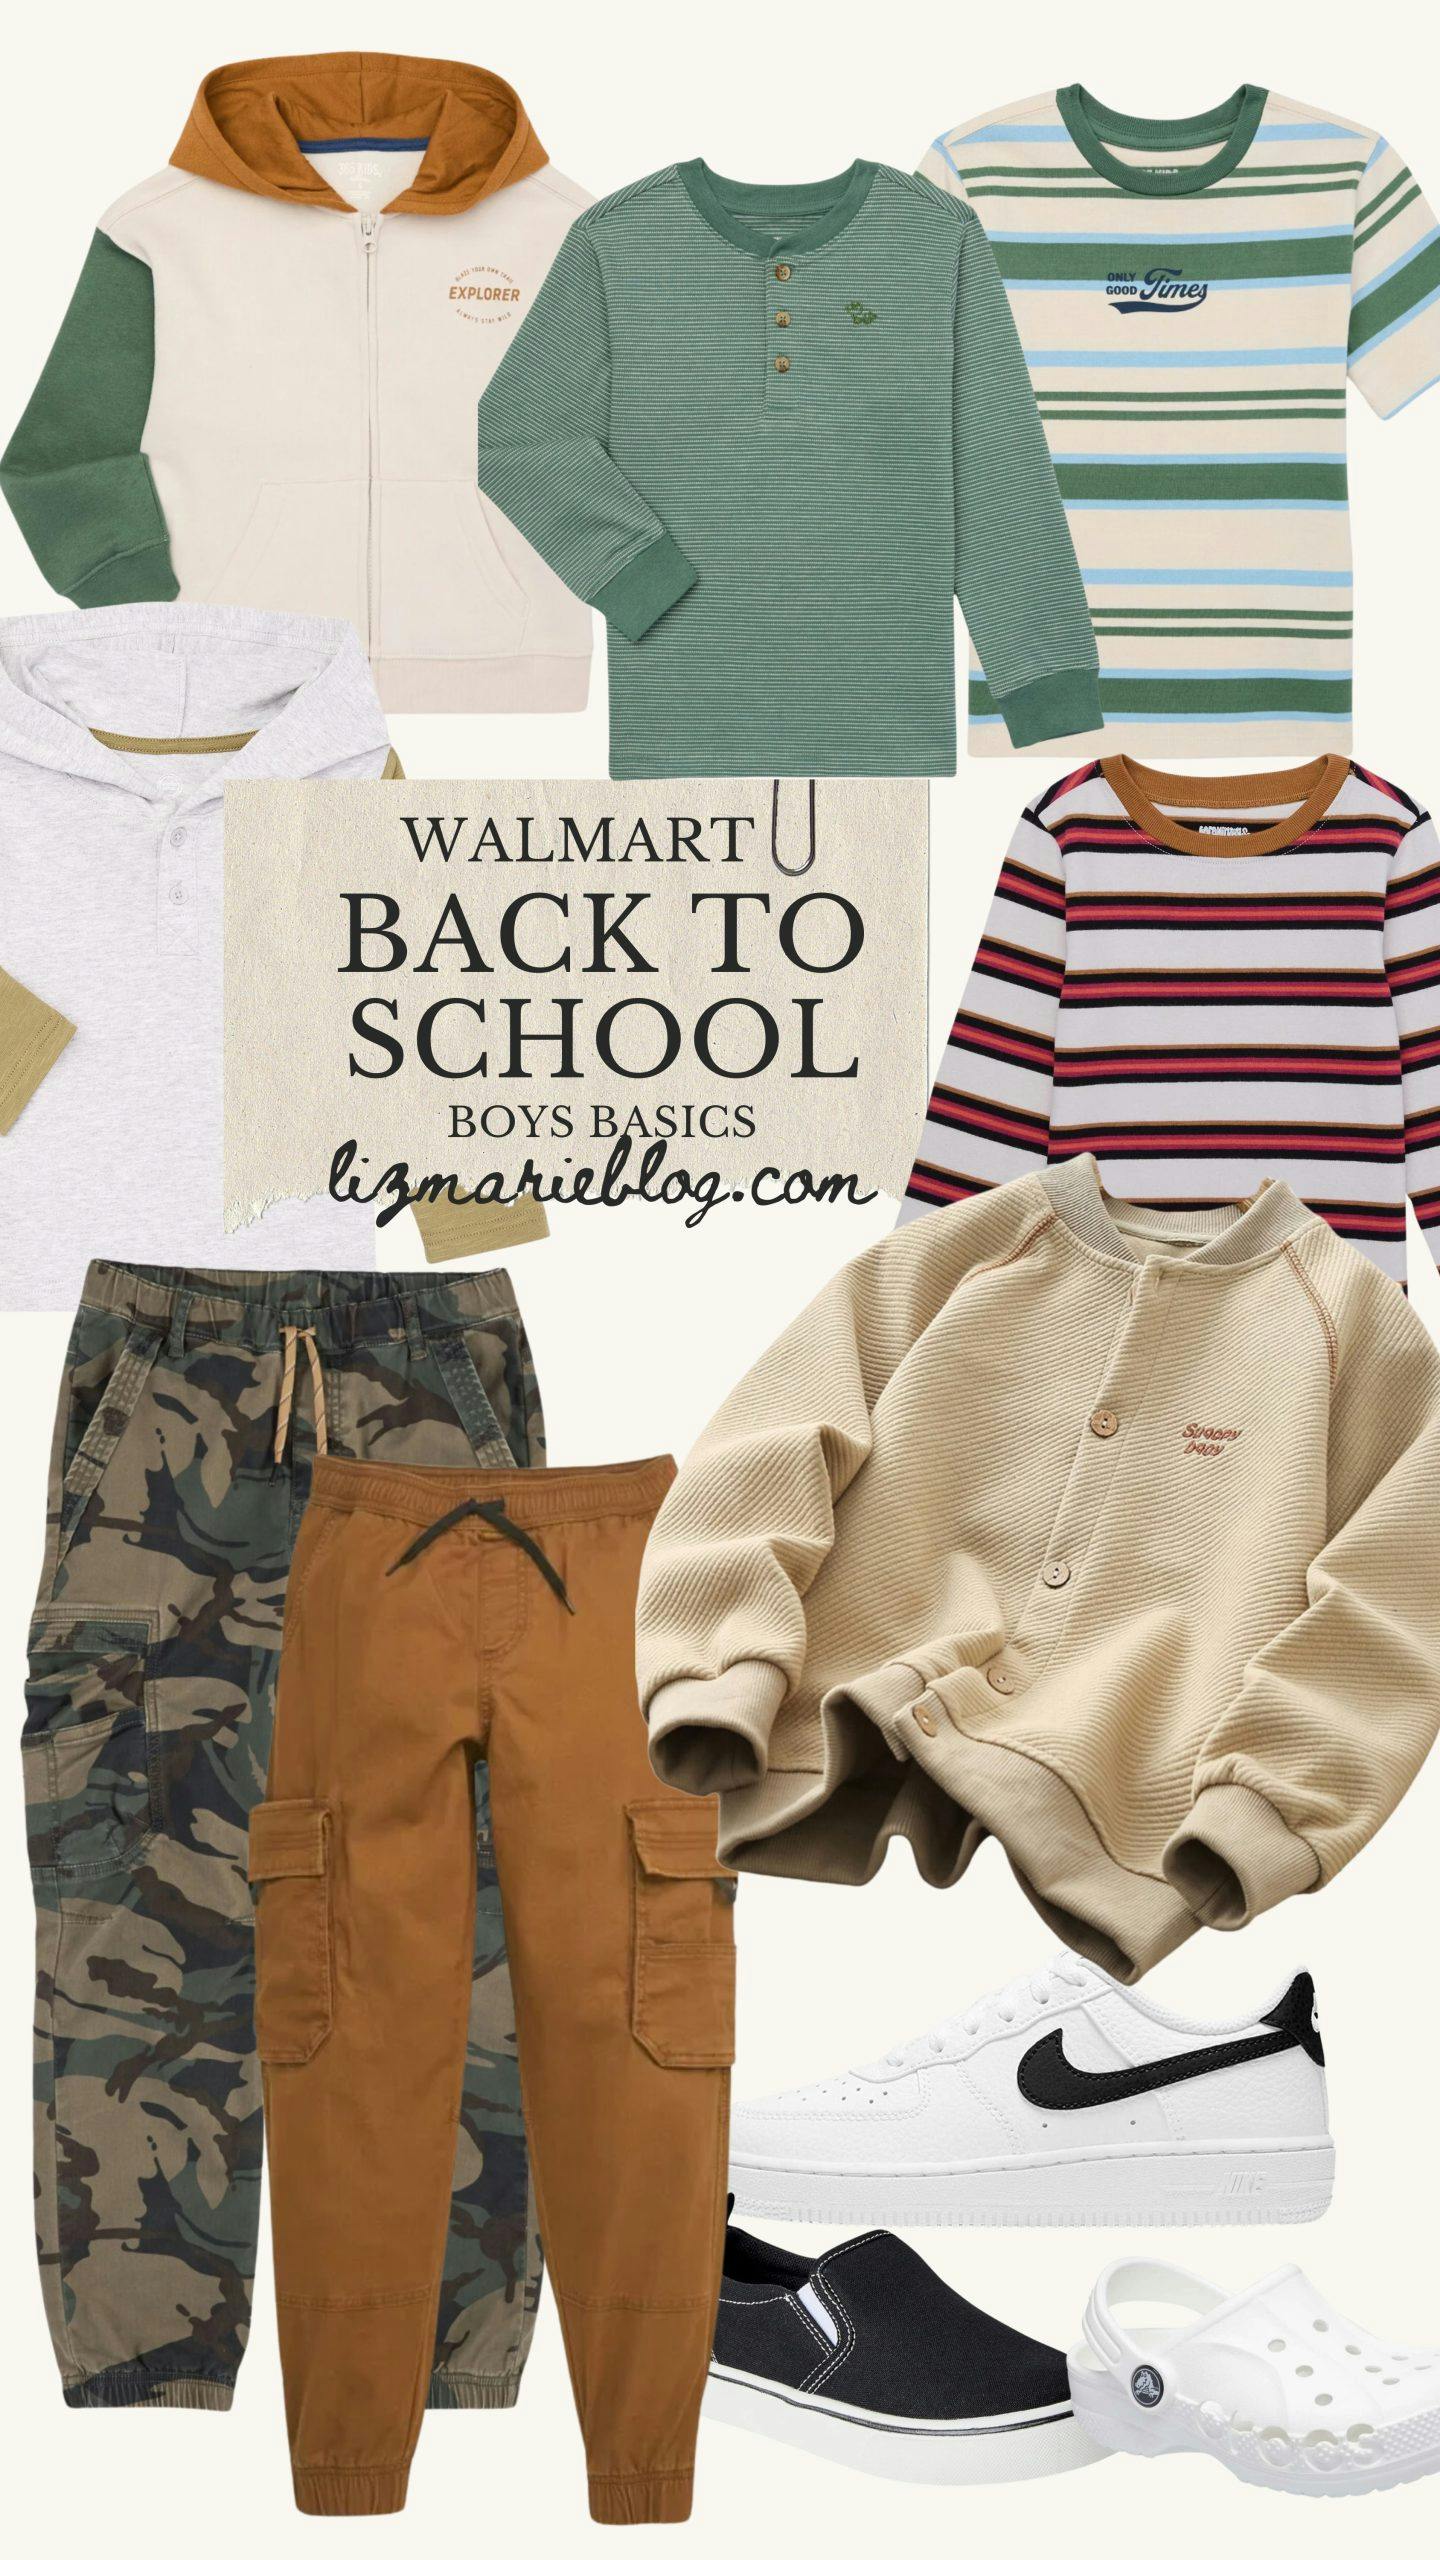 Cover Image for Get Ahead of the Game: Back to School Boys Classics from Walmart